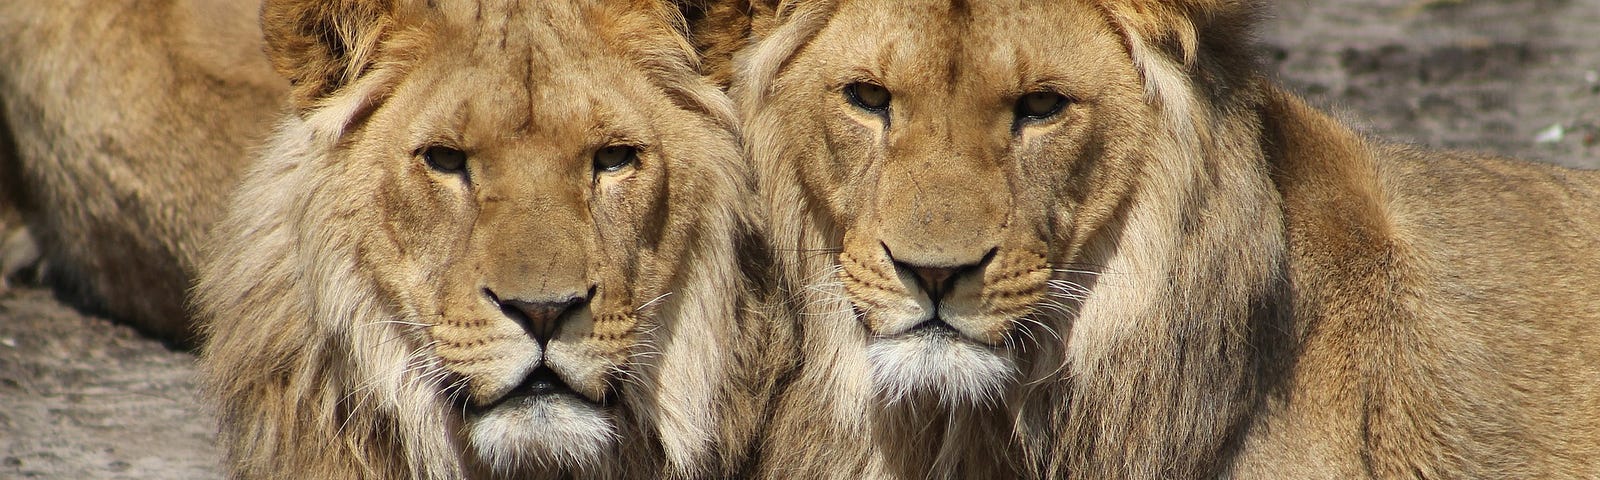 2 maned lions snuggling, looking into the camera.